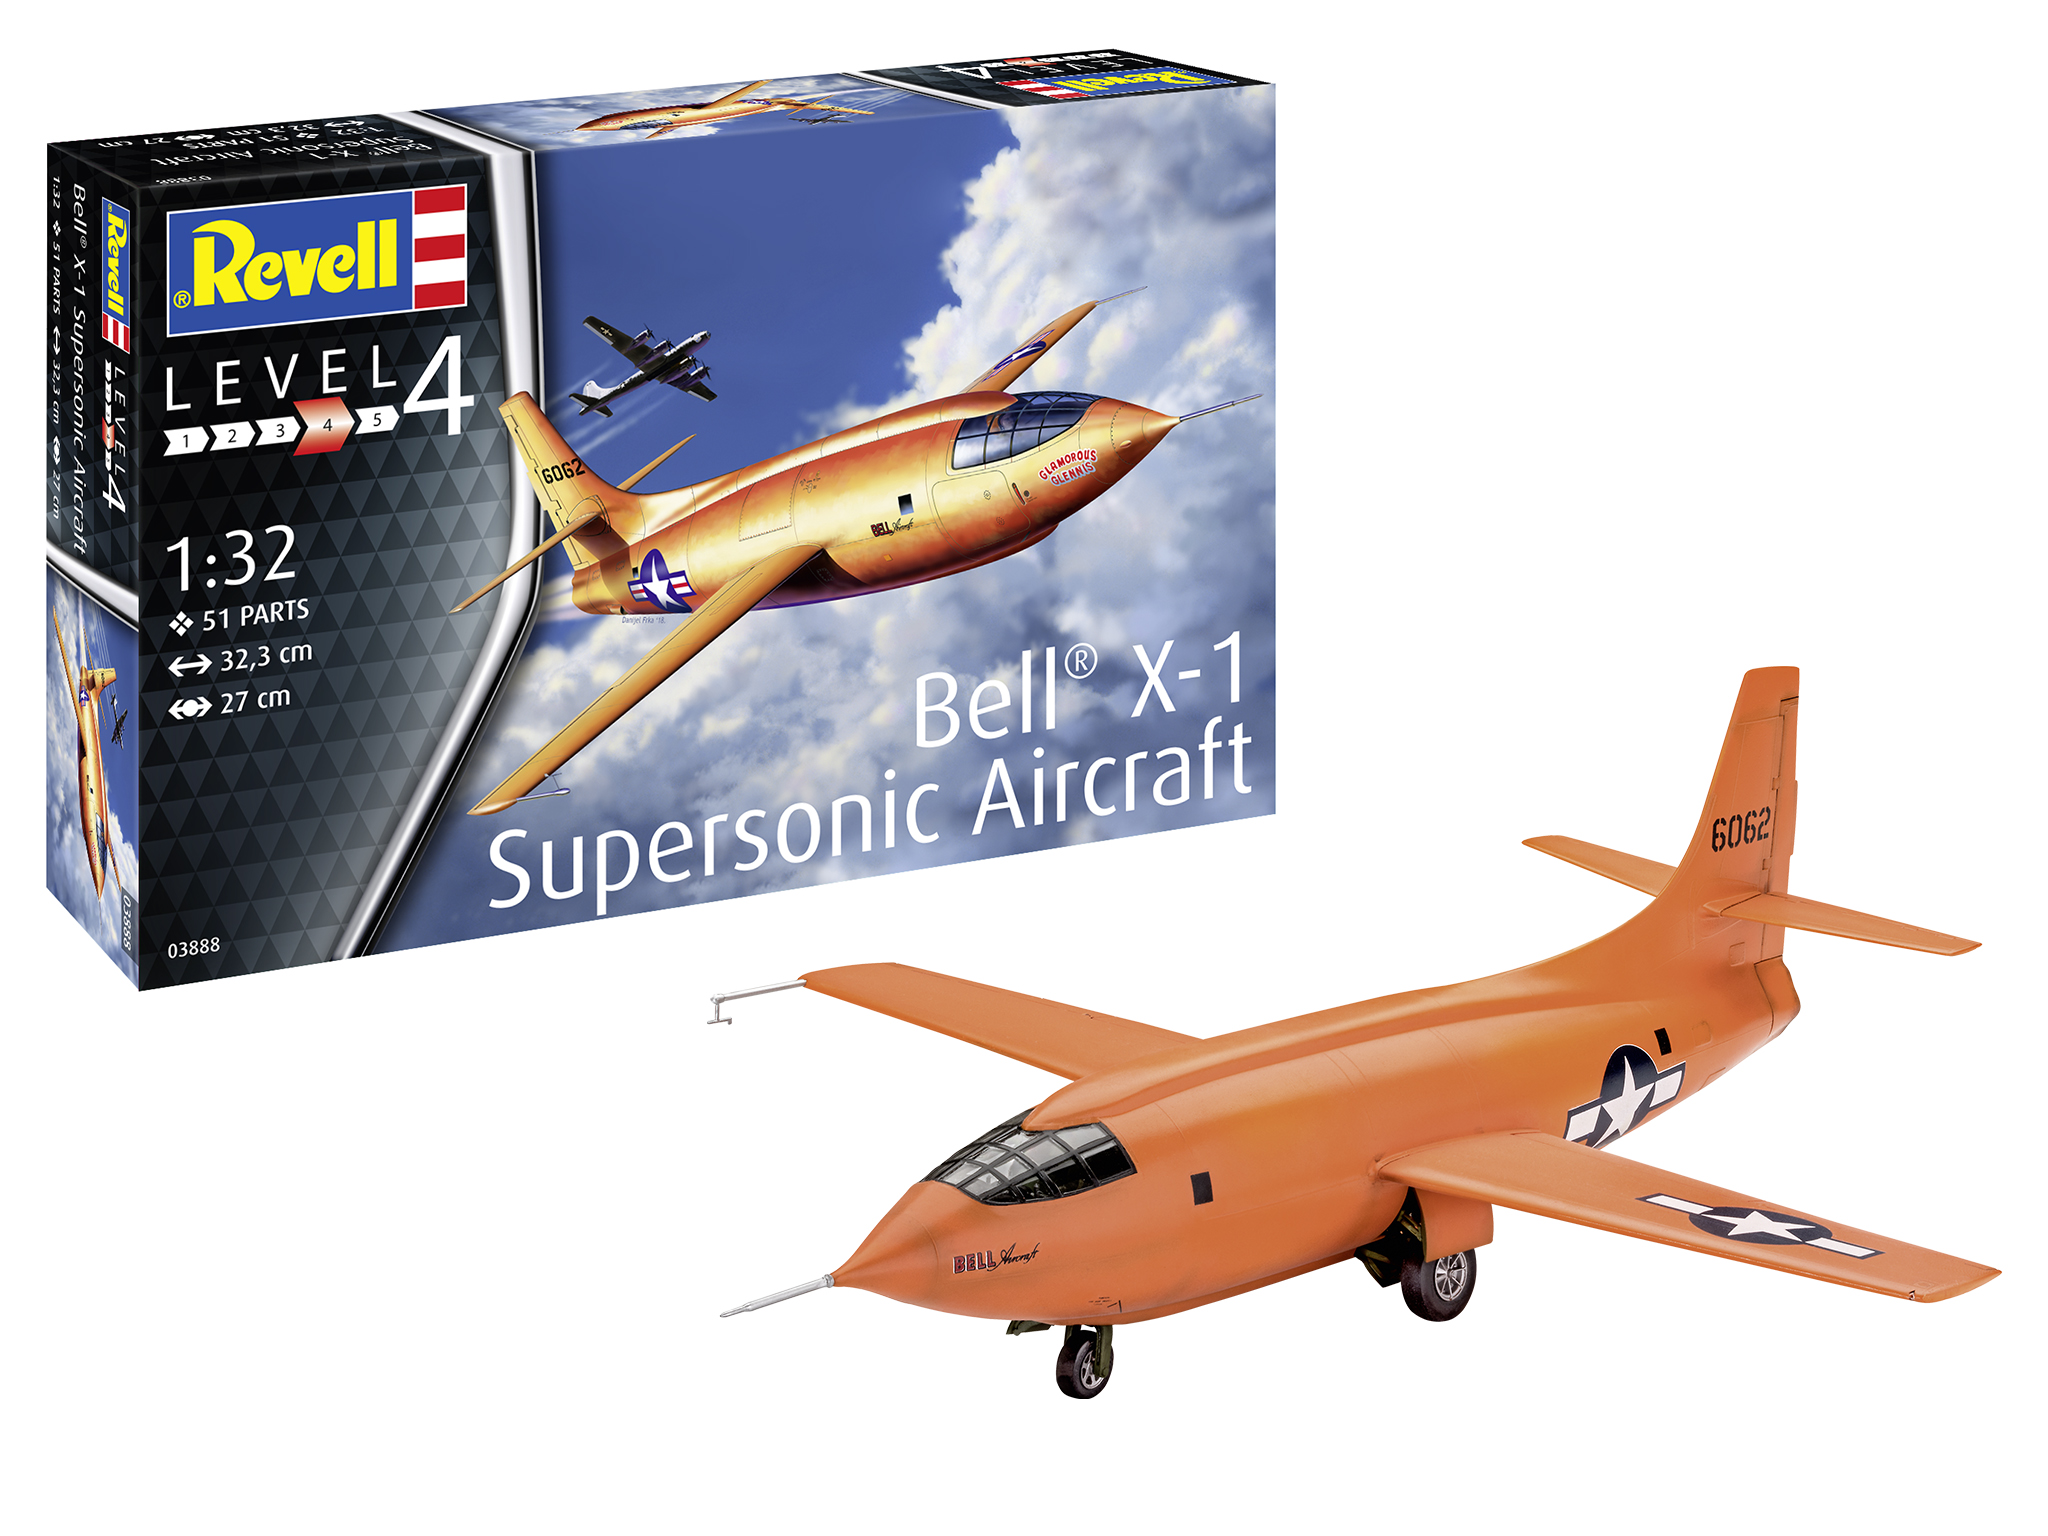 revell-03888-Bell-X1-Supersonic-Aircraft-Chuck-Yeager